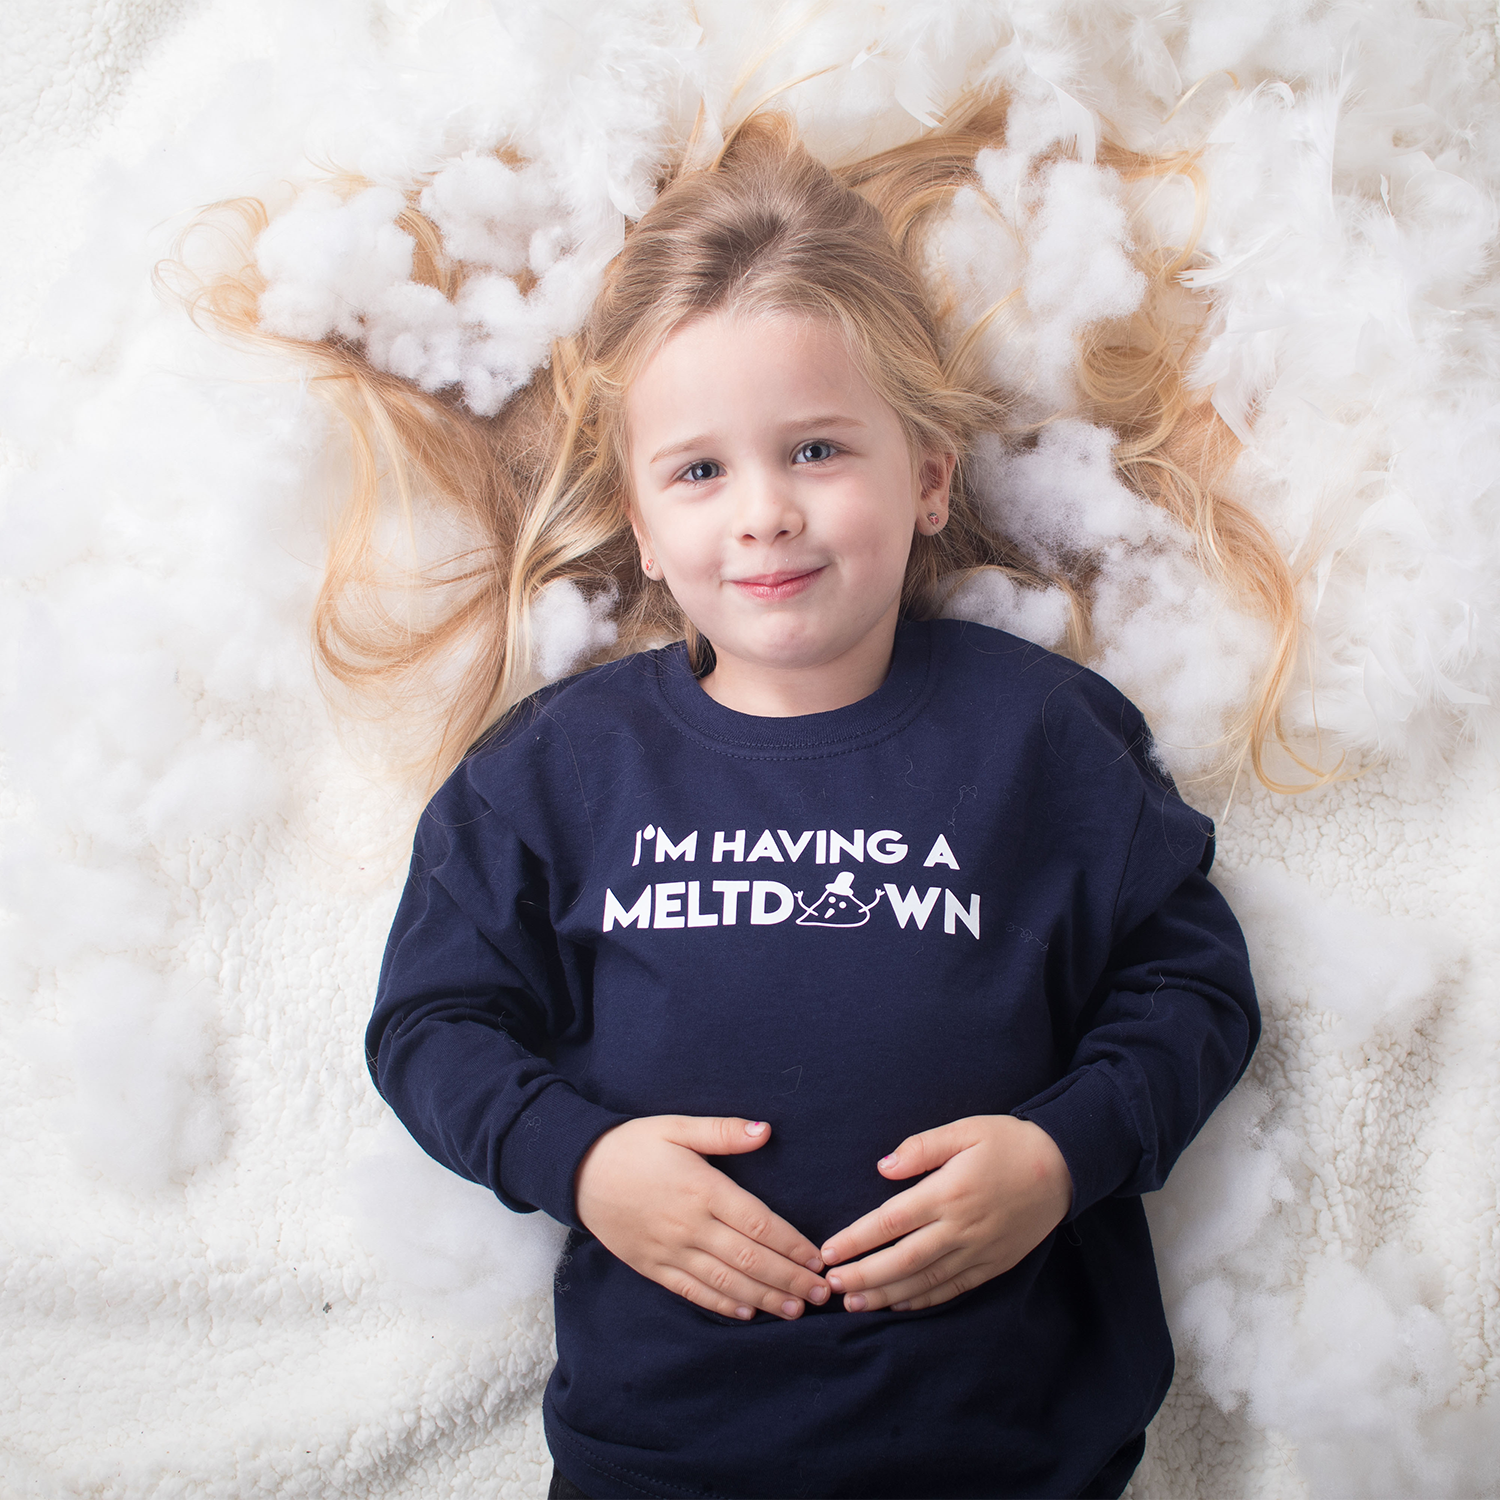 Blonde girl laying on snow with hair spread out, wearing navy shirt with 'I'm having a meltdown' print by KMLeon.